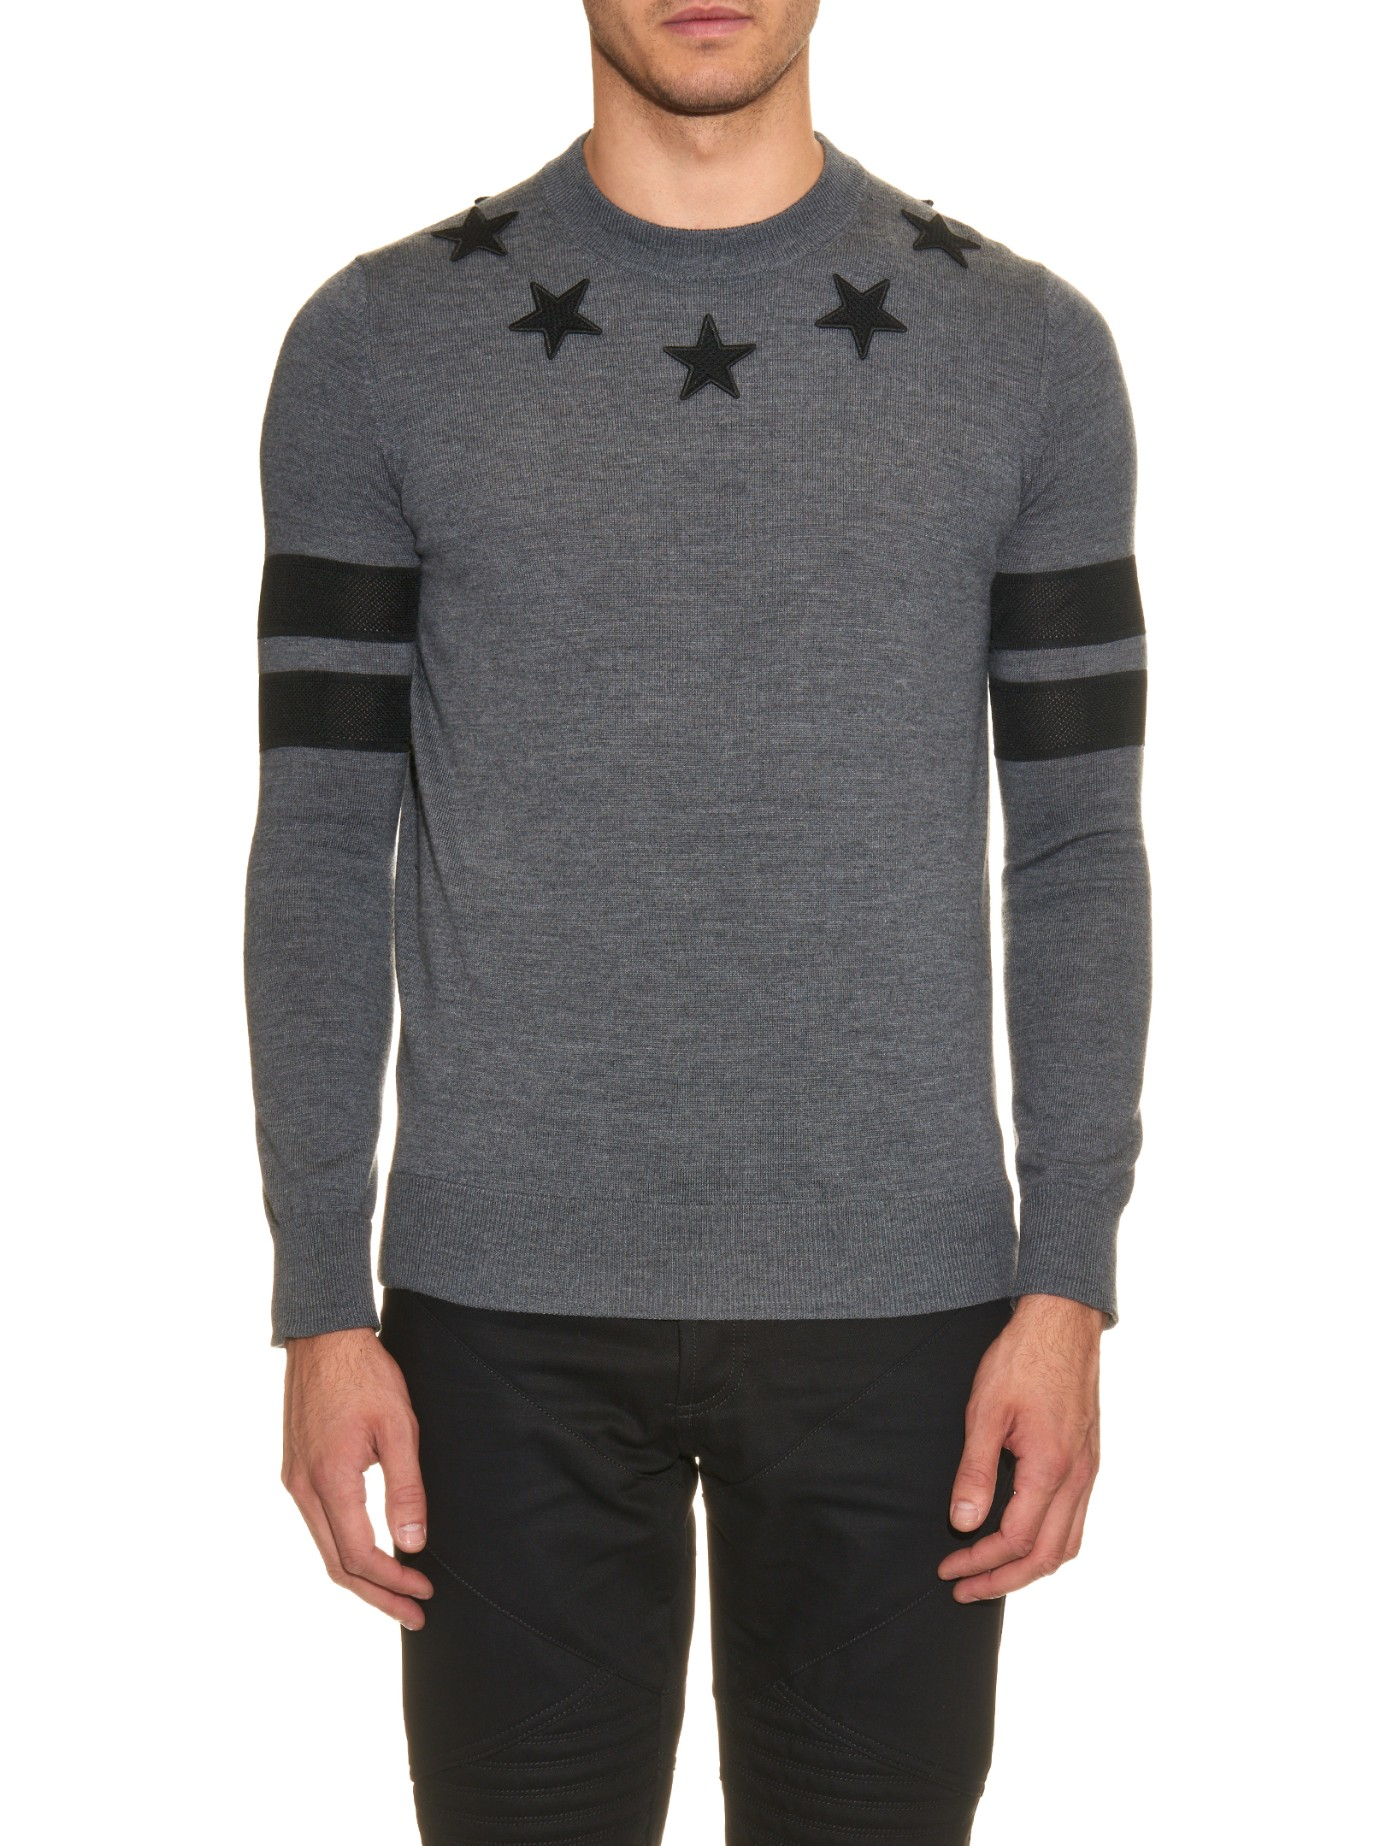 Givenchy Star-patch Wool-knit Sweater in Gray for Men - Lyst